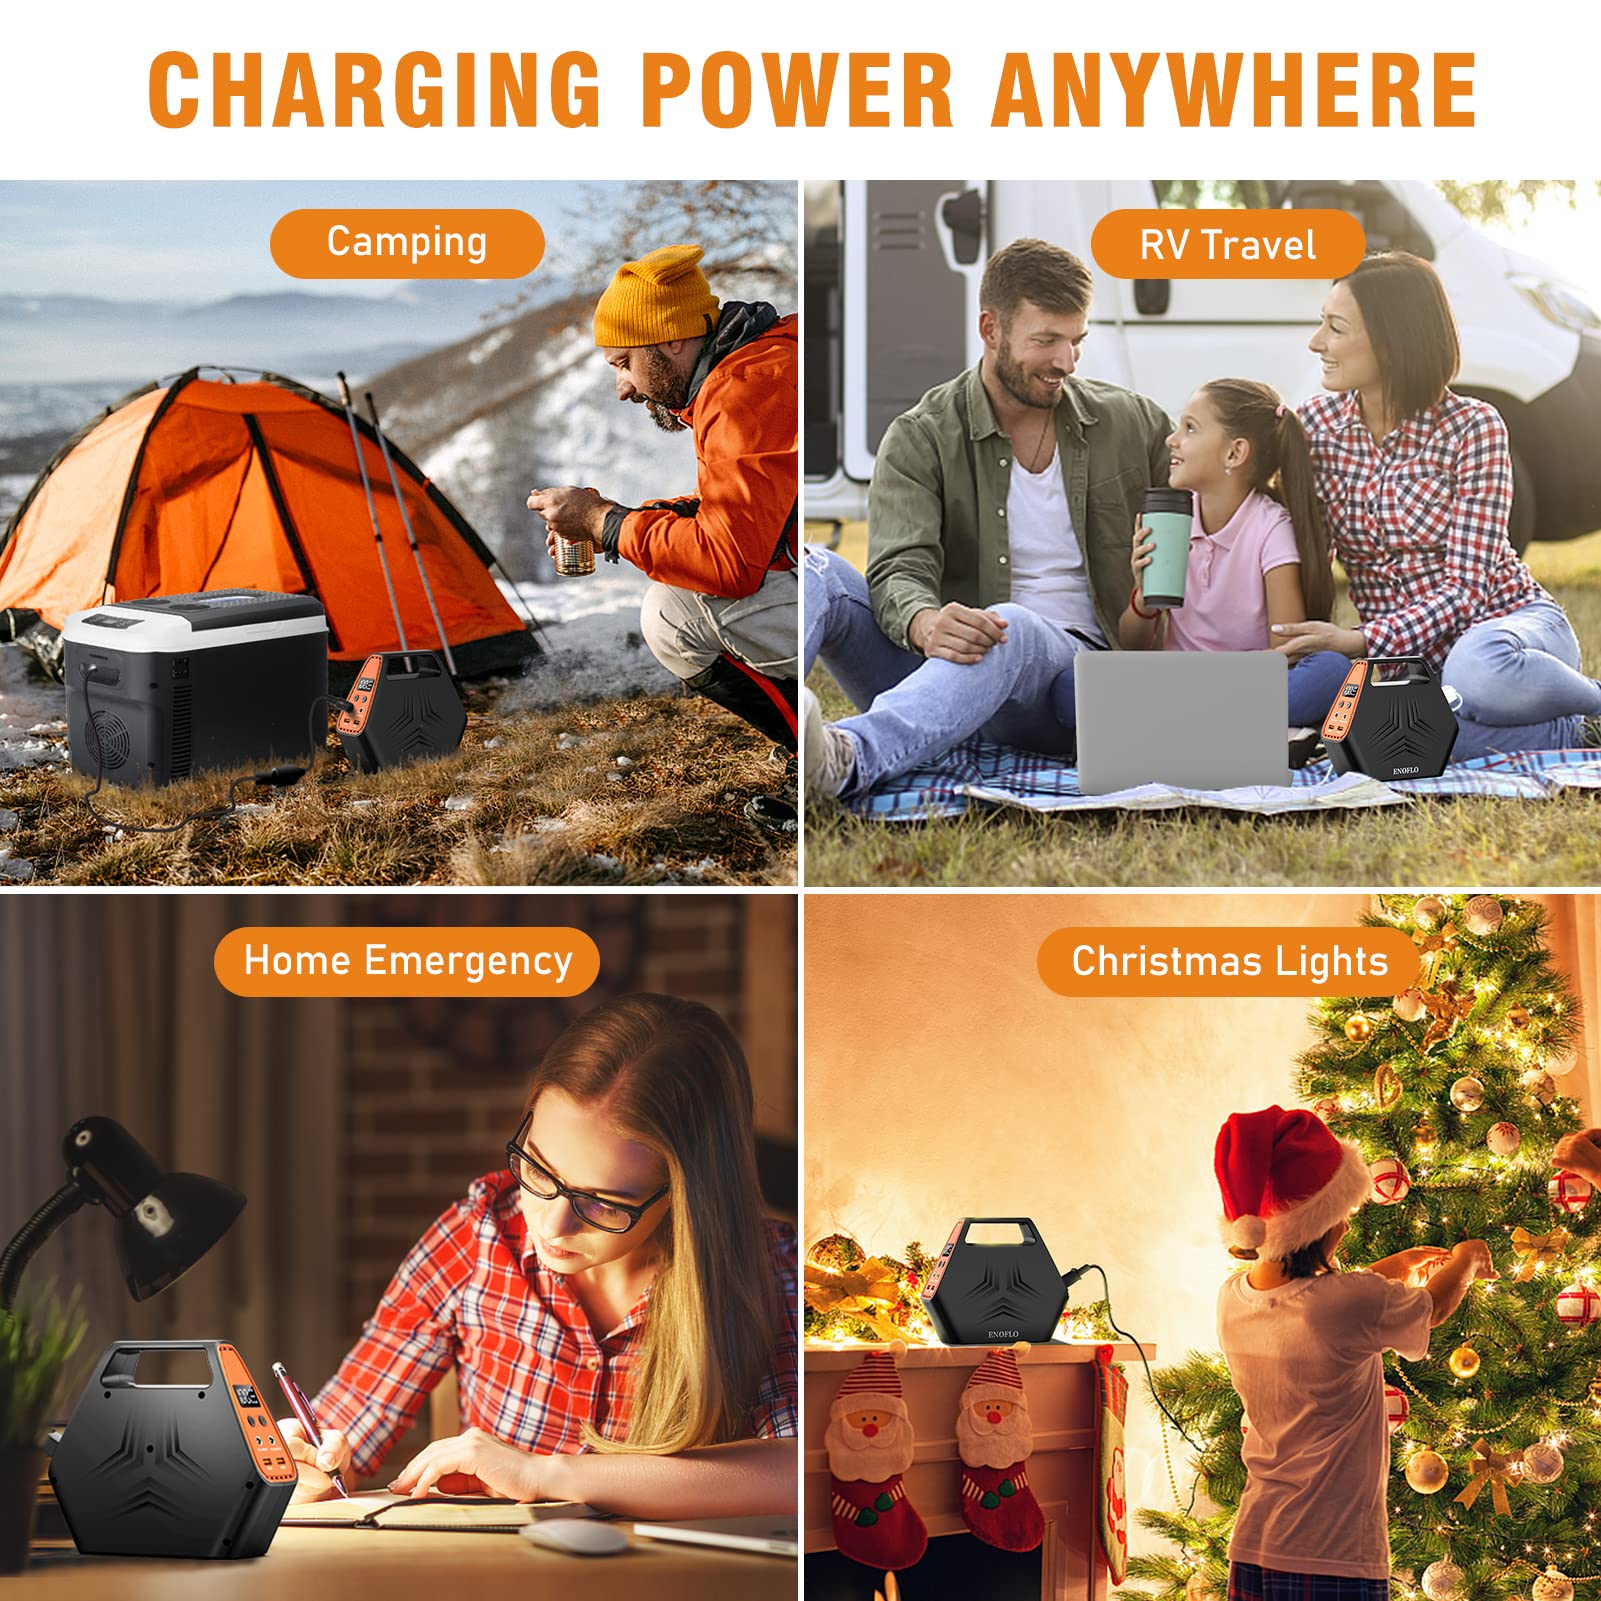 Power Bank with AC Outlet 26400mAh Battery Pack 97Wh Portable Laptop Charger QC 3.0 Portable Power Station & 30W Portable Foldable Solar Panel Charger for Outdoor Camping Solar Battery Charger12 Volt